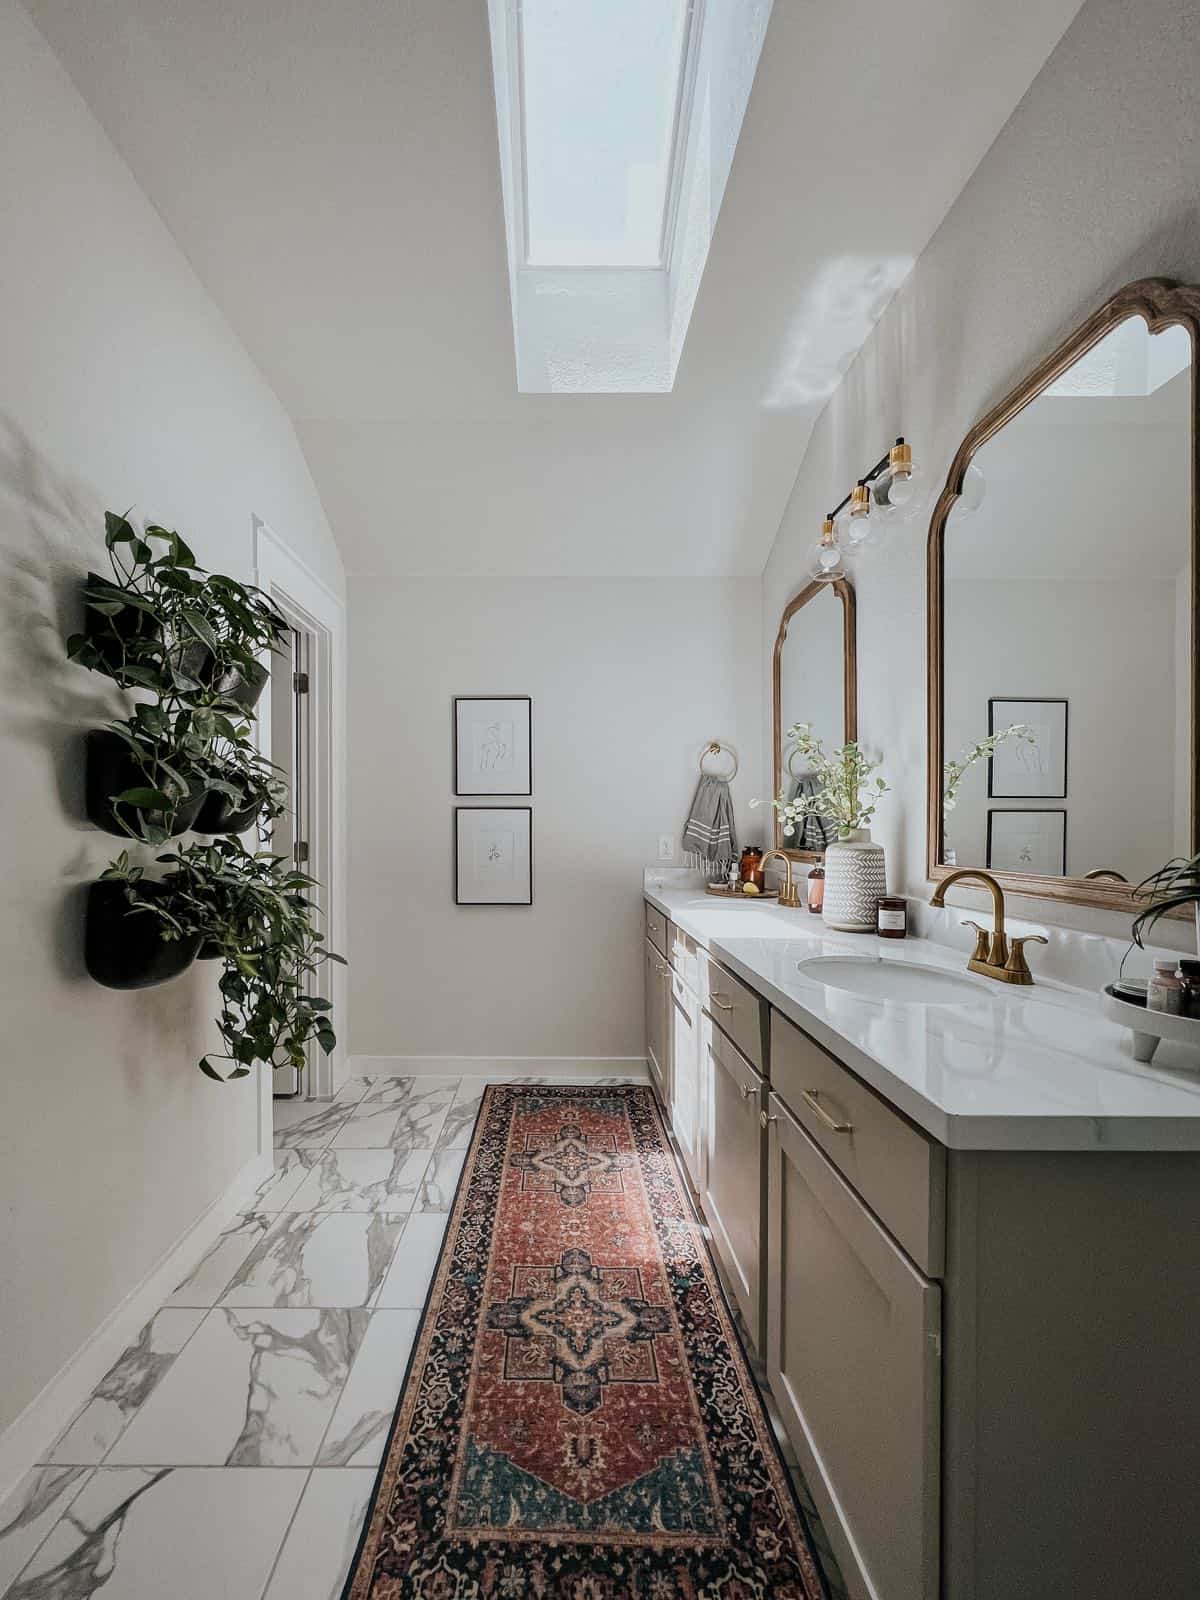 primary bathroom with a skylight and vintage style rug 